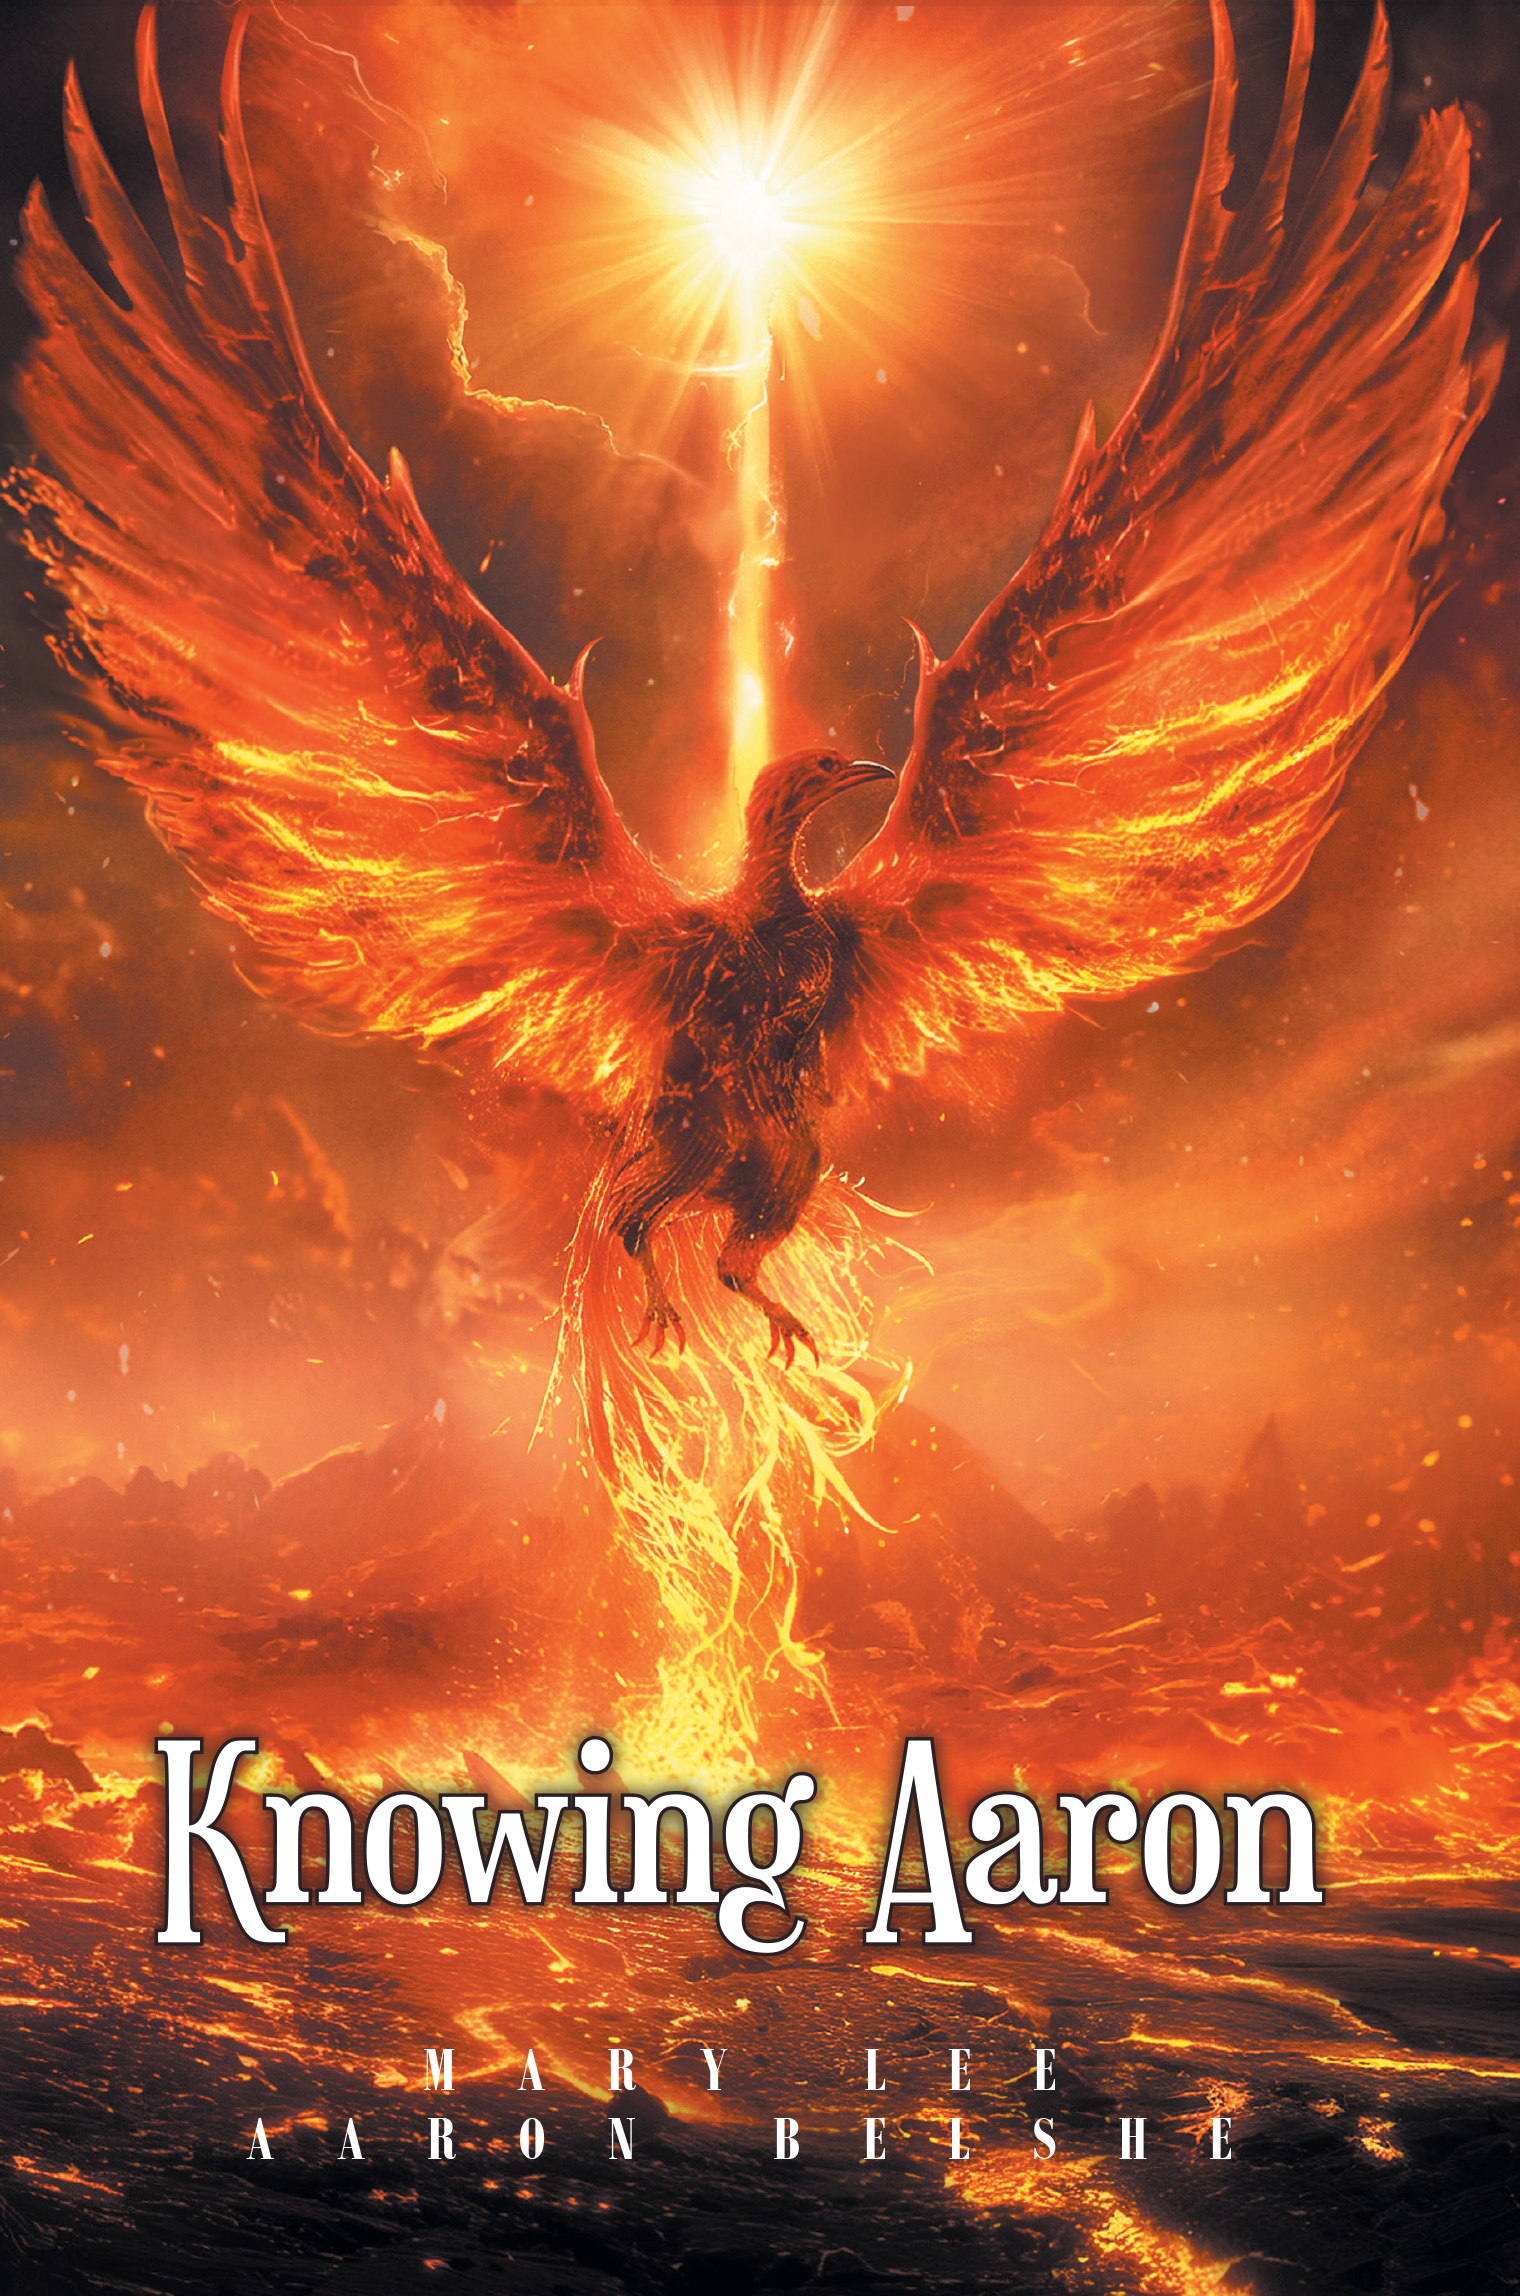 Mary Lee and Aaron Belshe’s Newly Released "Knowing Aaron" is a Poignant Exploration of Addiction and Redemption